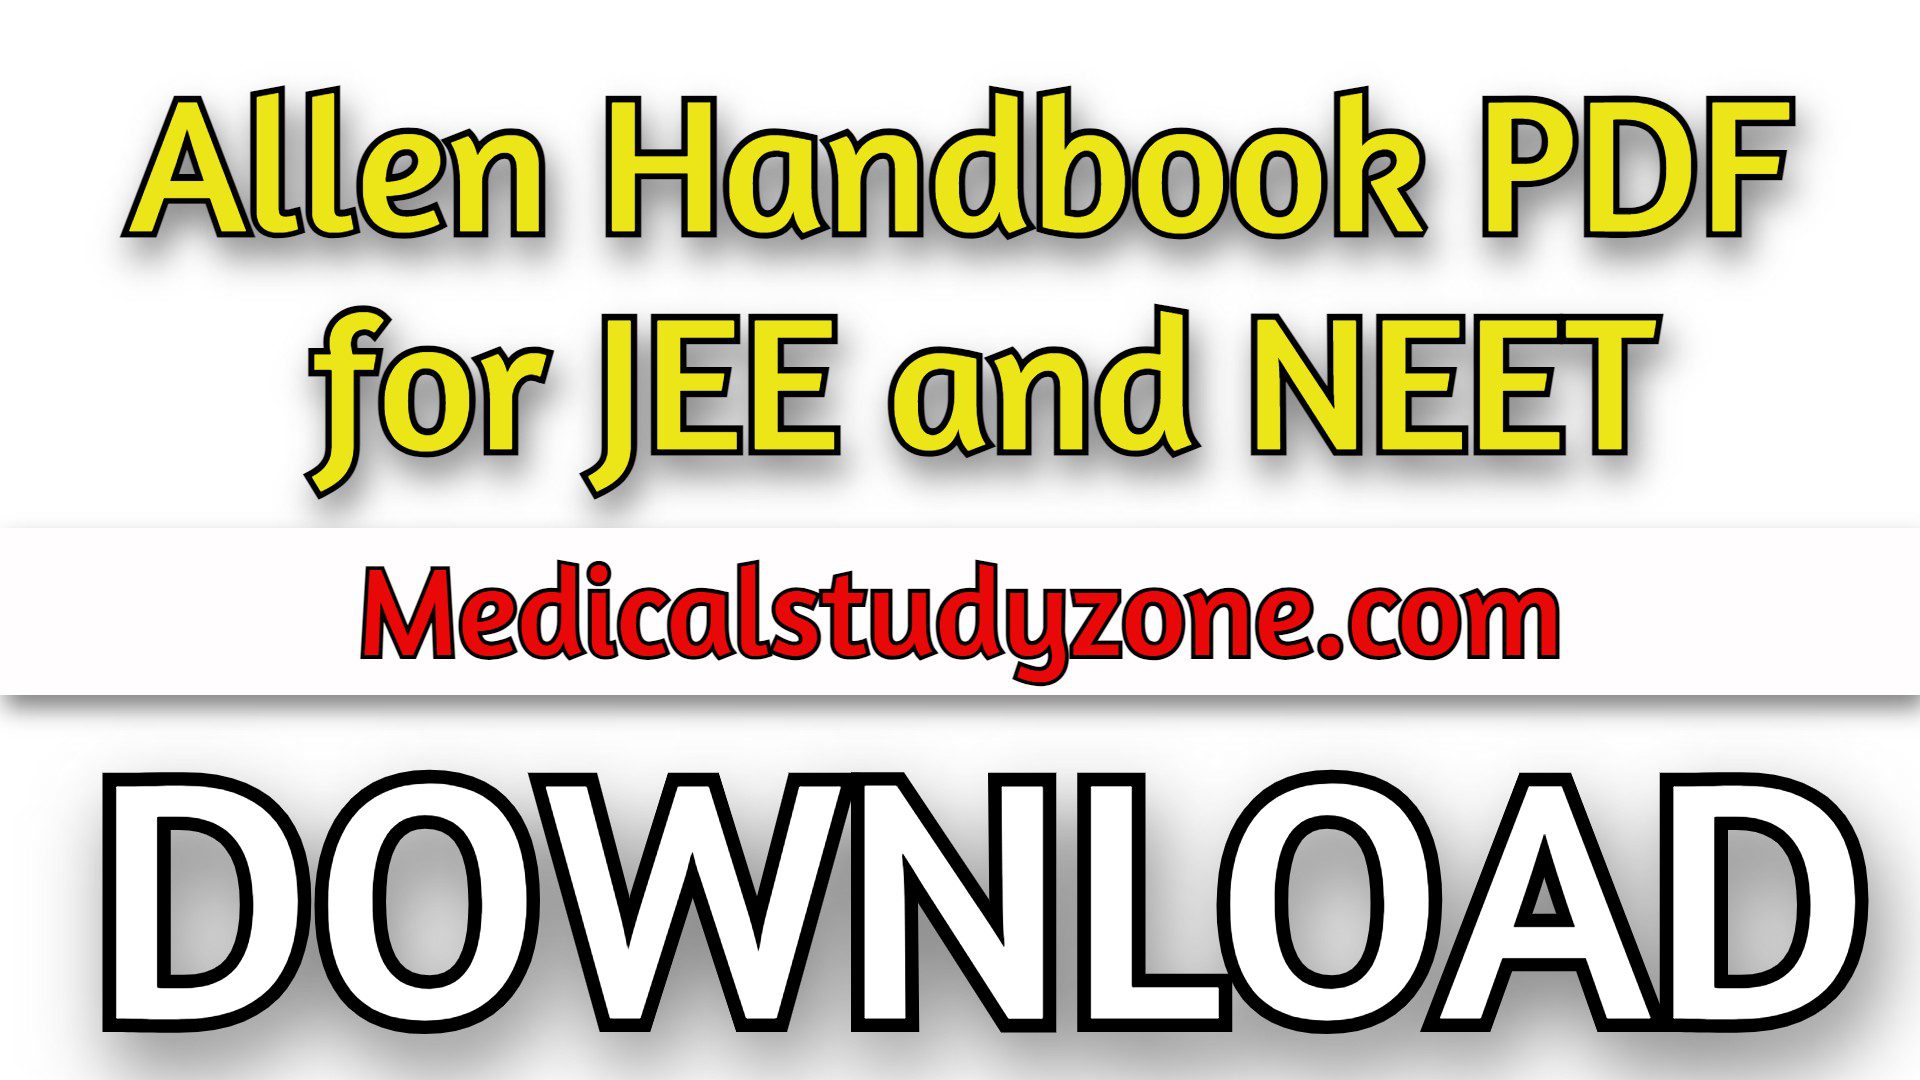 Allen Handbooks PDF 2022 [Complete Series] for JEE and NEET Free Download